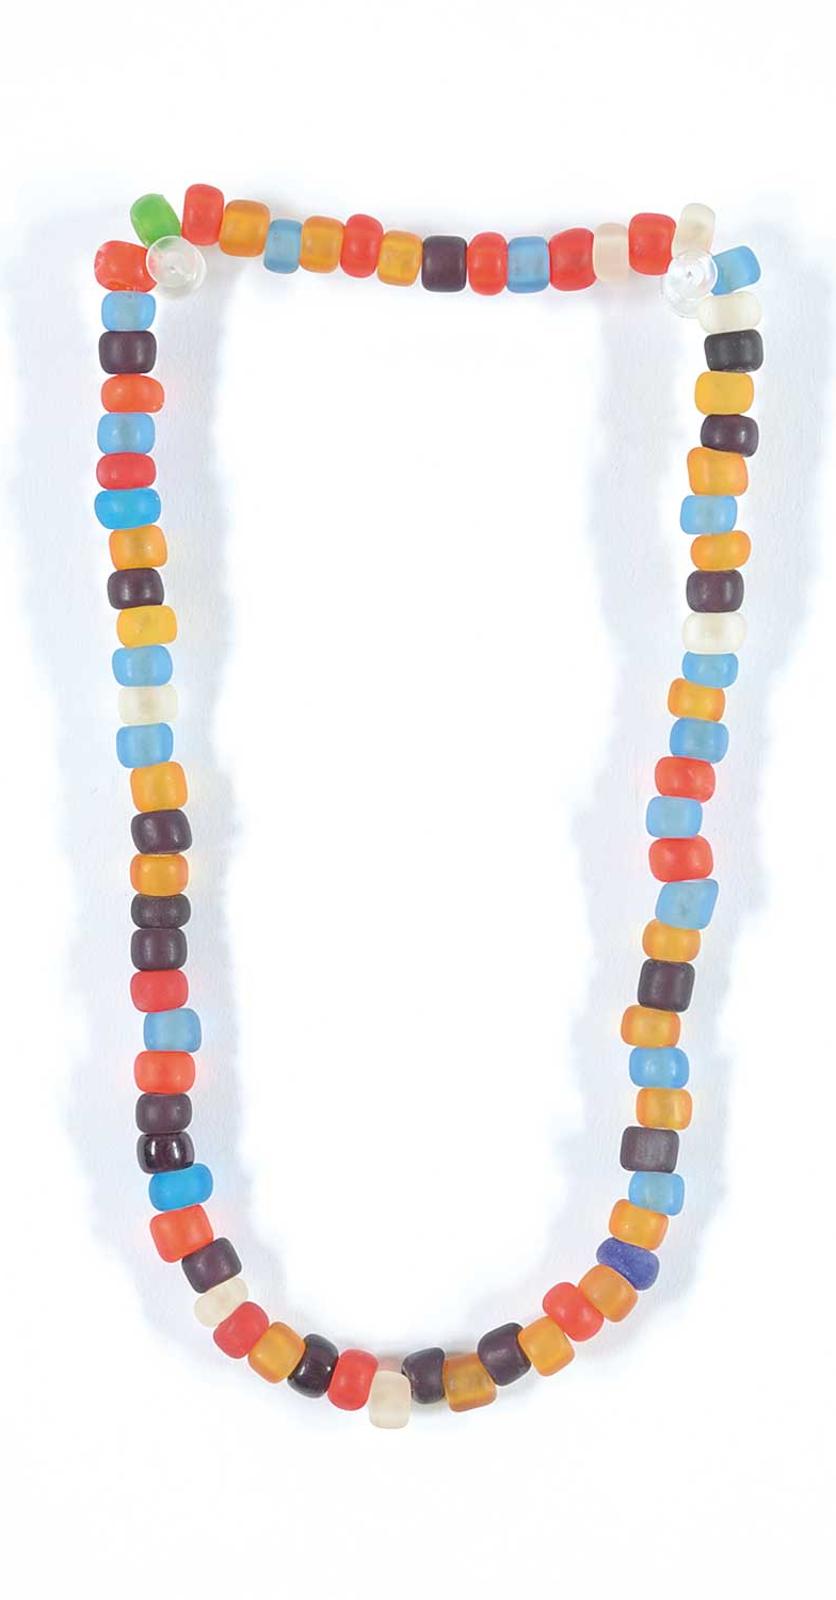 First Nations Basket School - Multicoloured Glass Bead Necklace